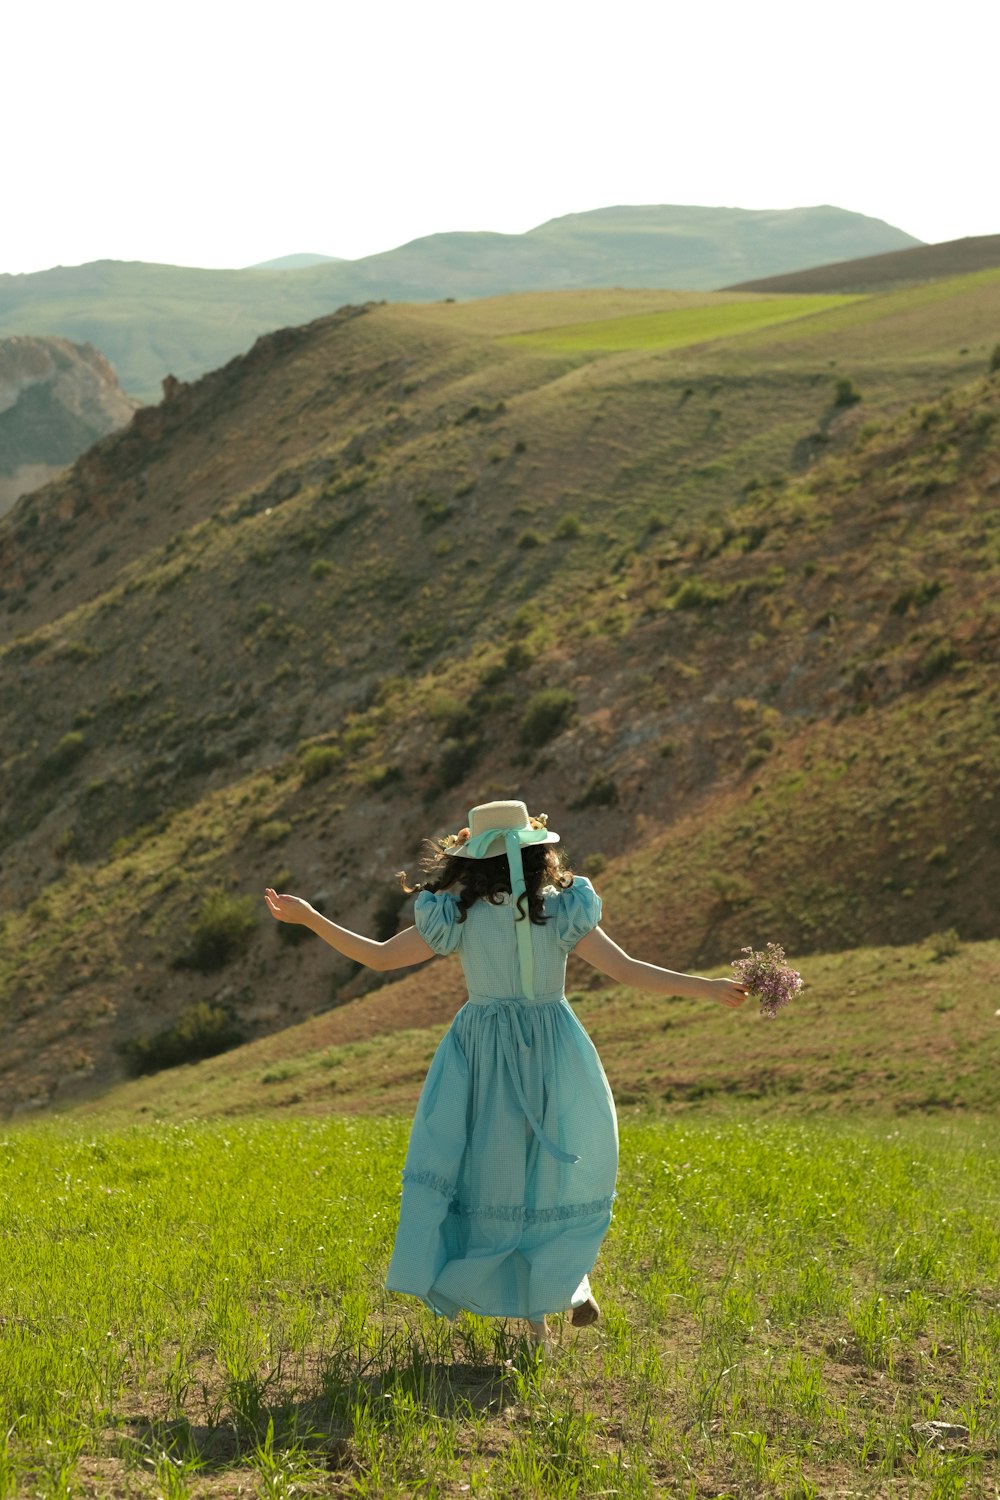 a woman in a blue dress and hat walking through a field